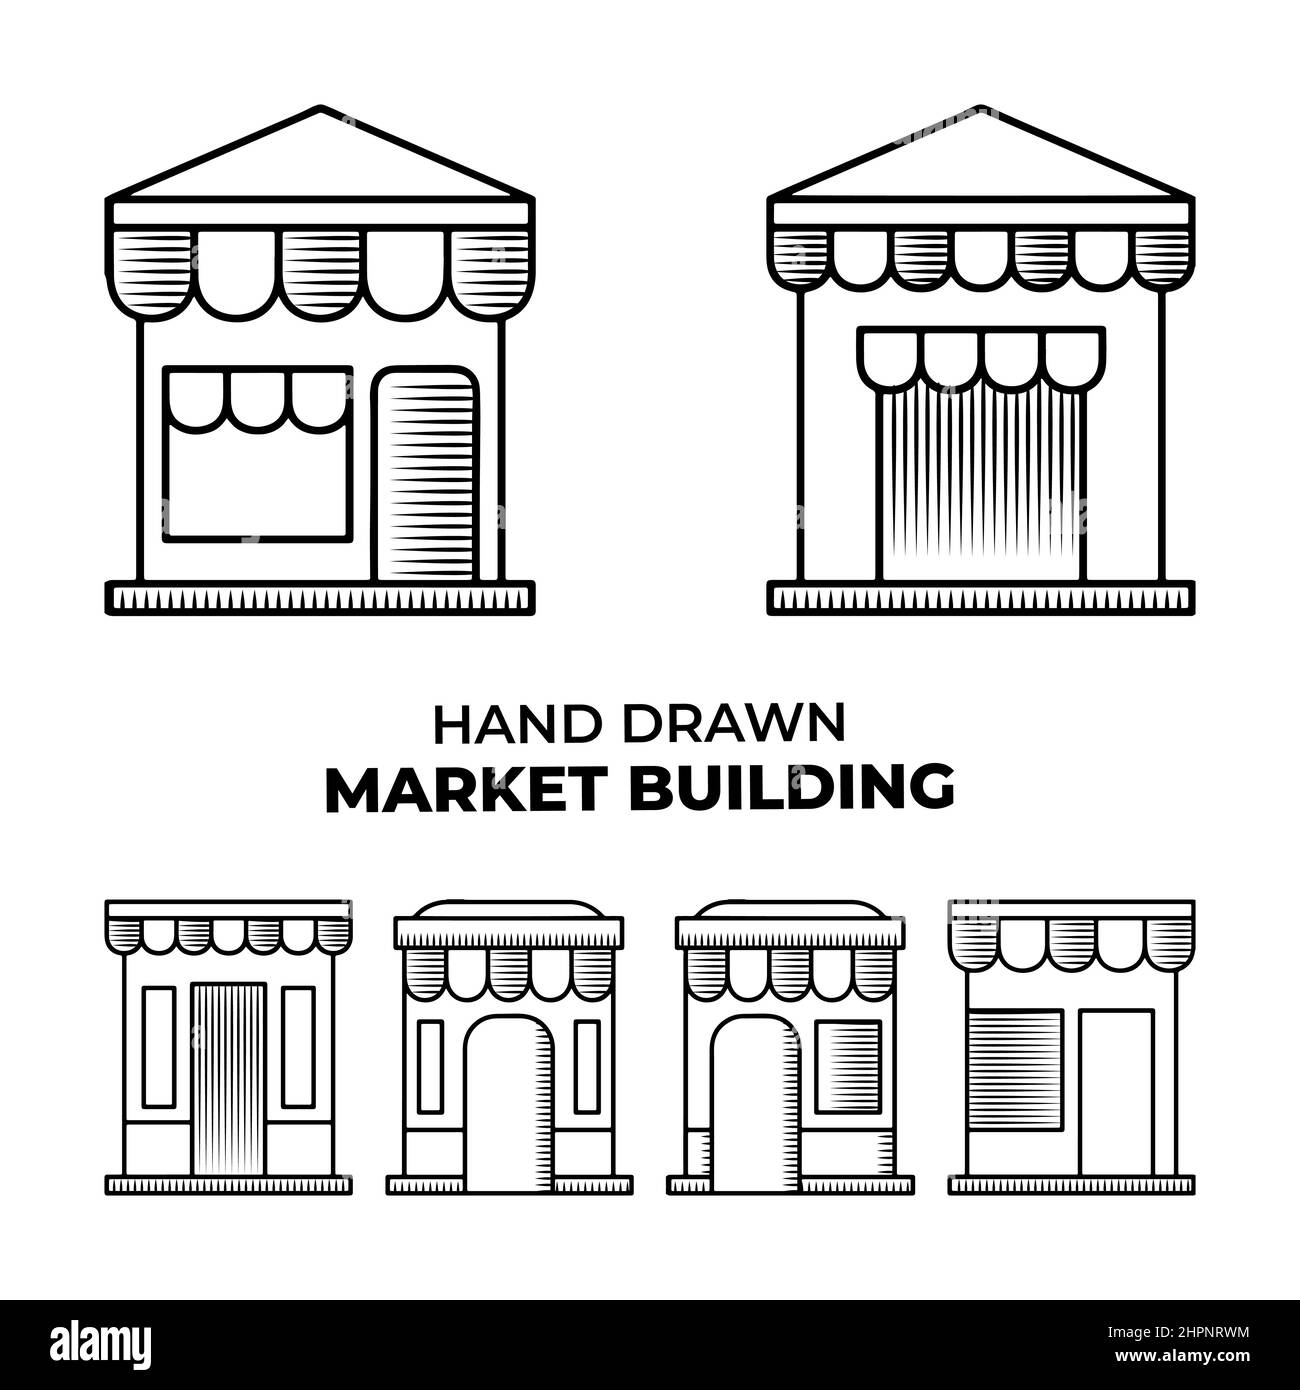 Market store building with hand drawn outline doodle illustration Stock Vector